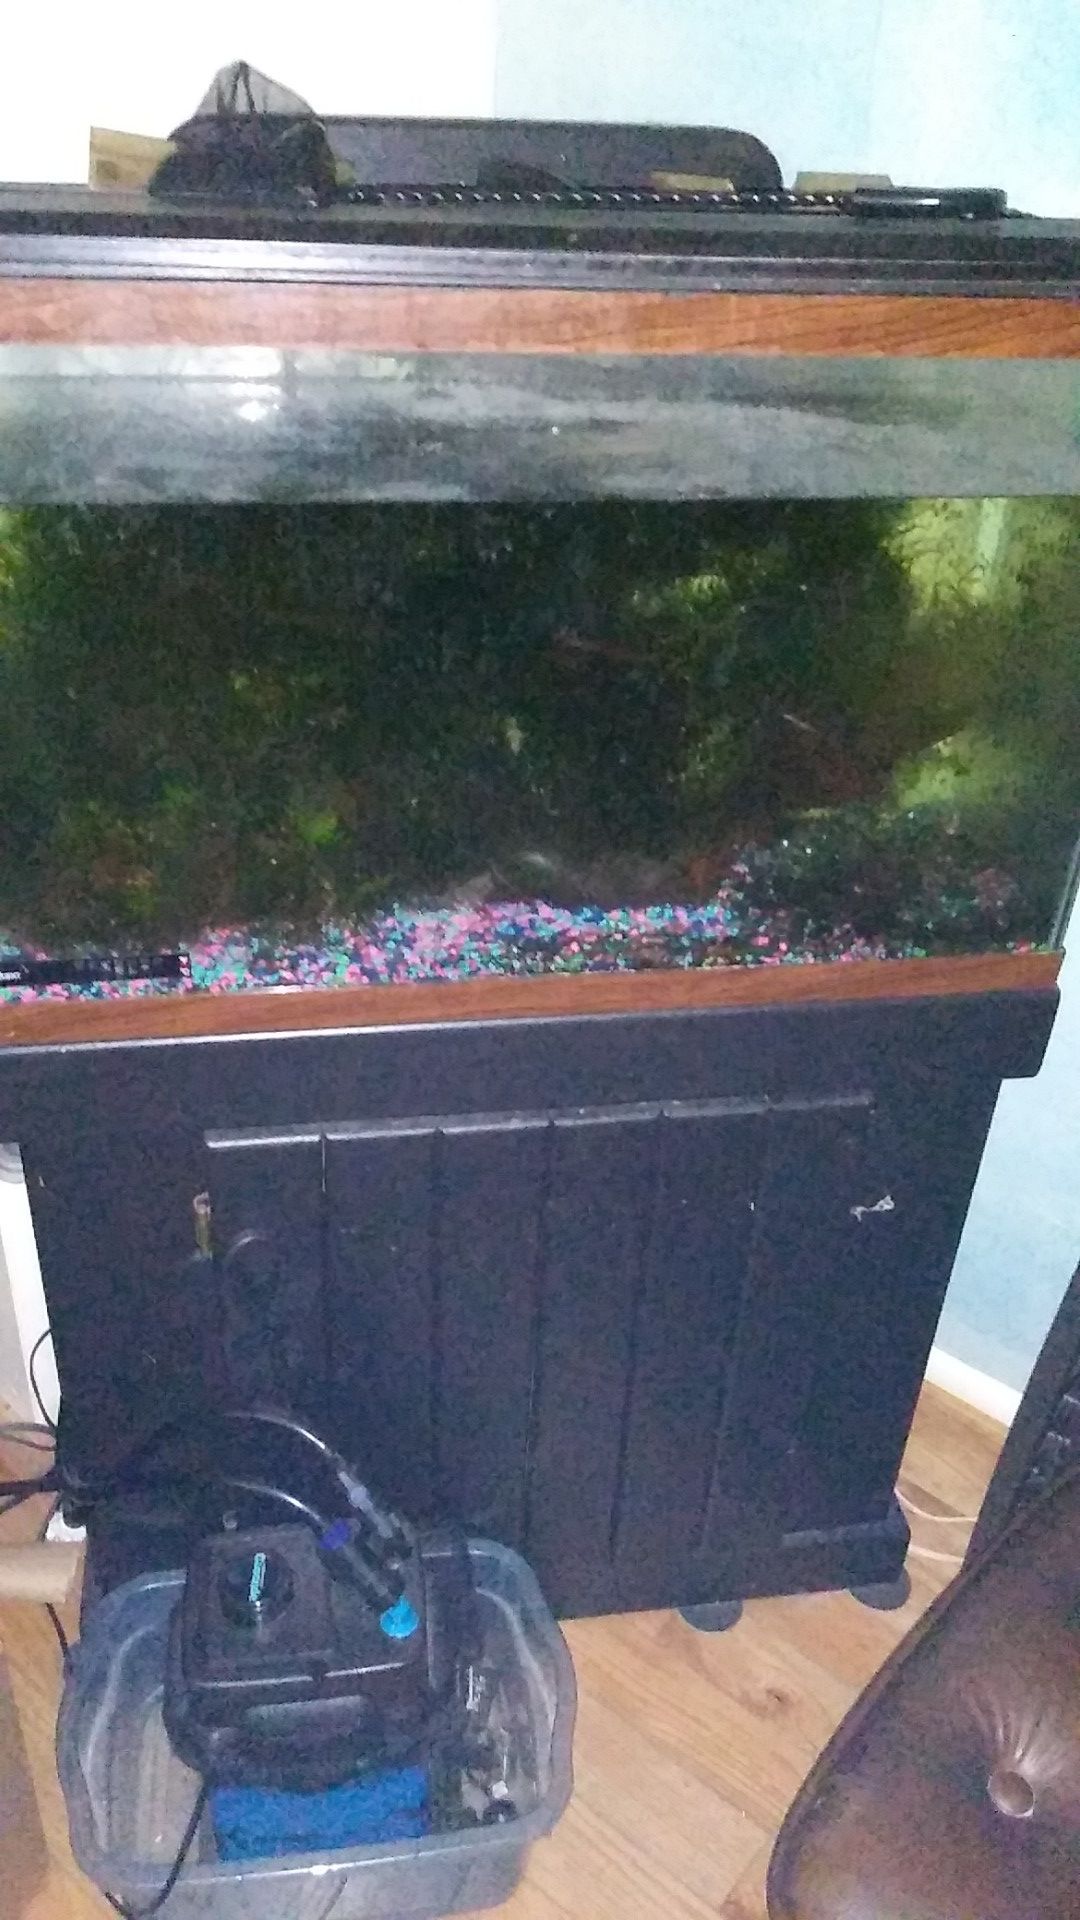 30 gallon fish tank with cabinet homemade very sturdy filter included only change it but once a year